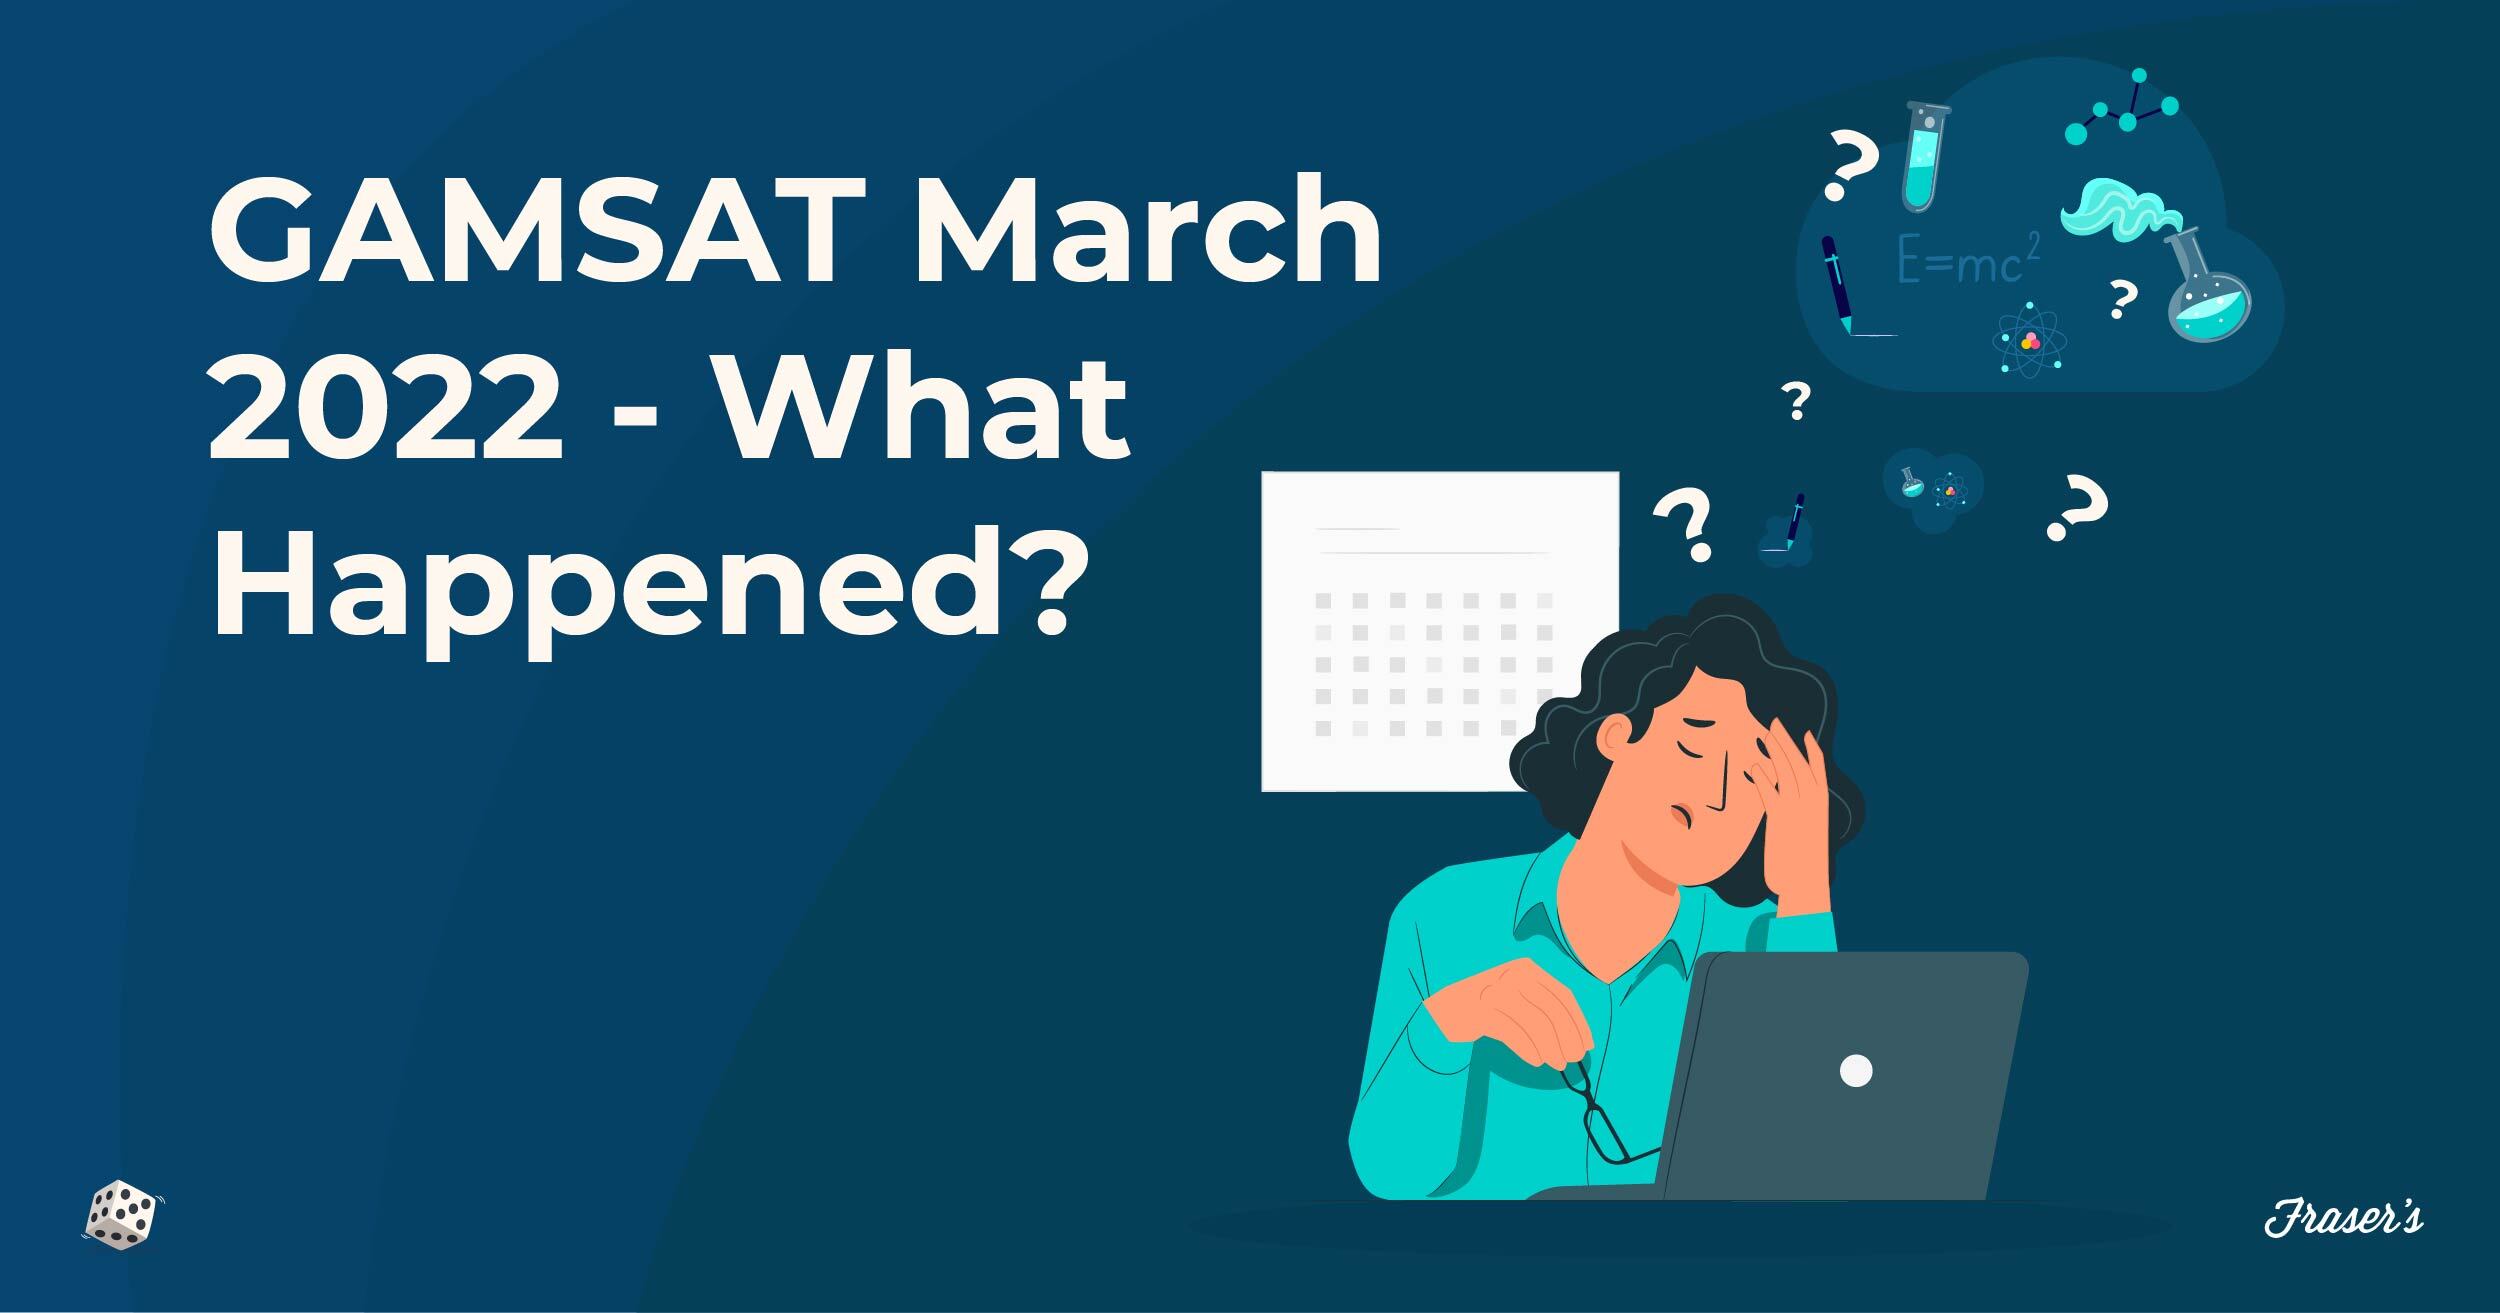 Podcast | GAMSAT March 2022 - What Happened? featured image